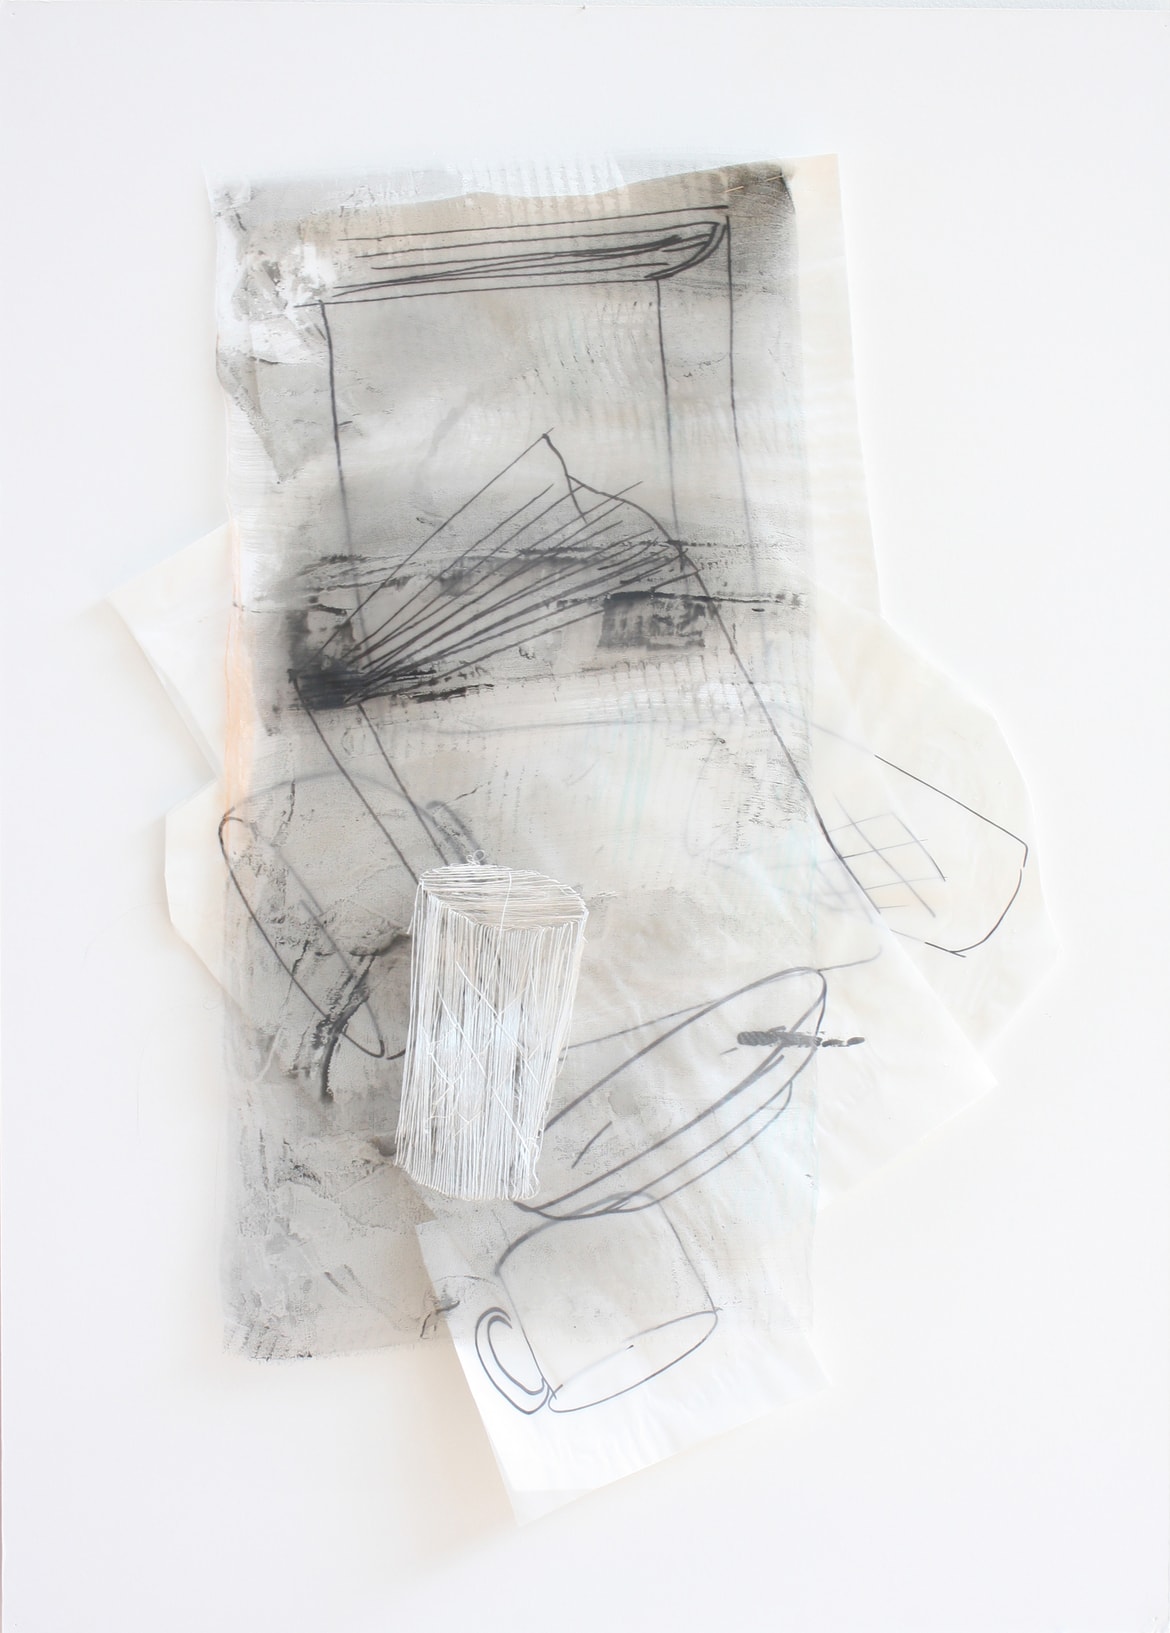 ‘The Time to Stop I’, 2014, 80 x 50 cm, Paper, drawing with permanent pen, Italian coloured synthetic cloth, Japanese silk thread